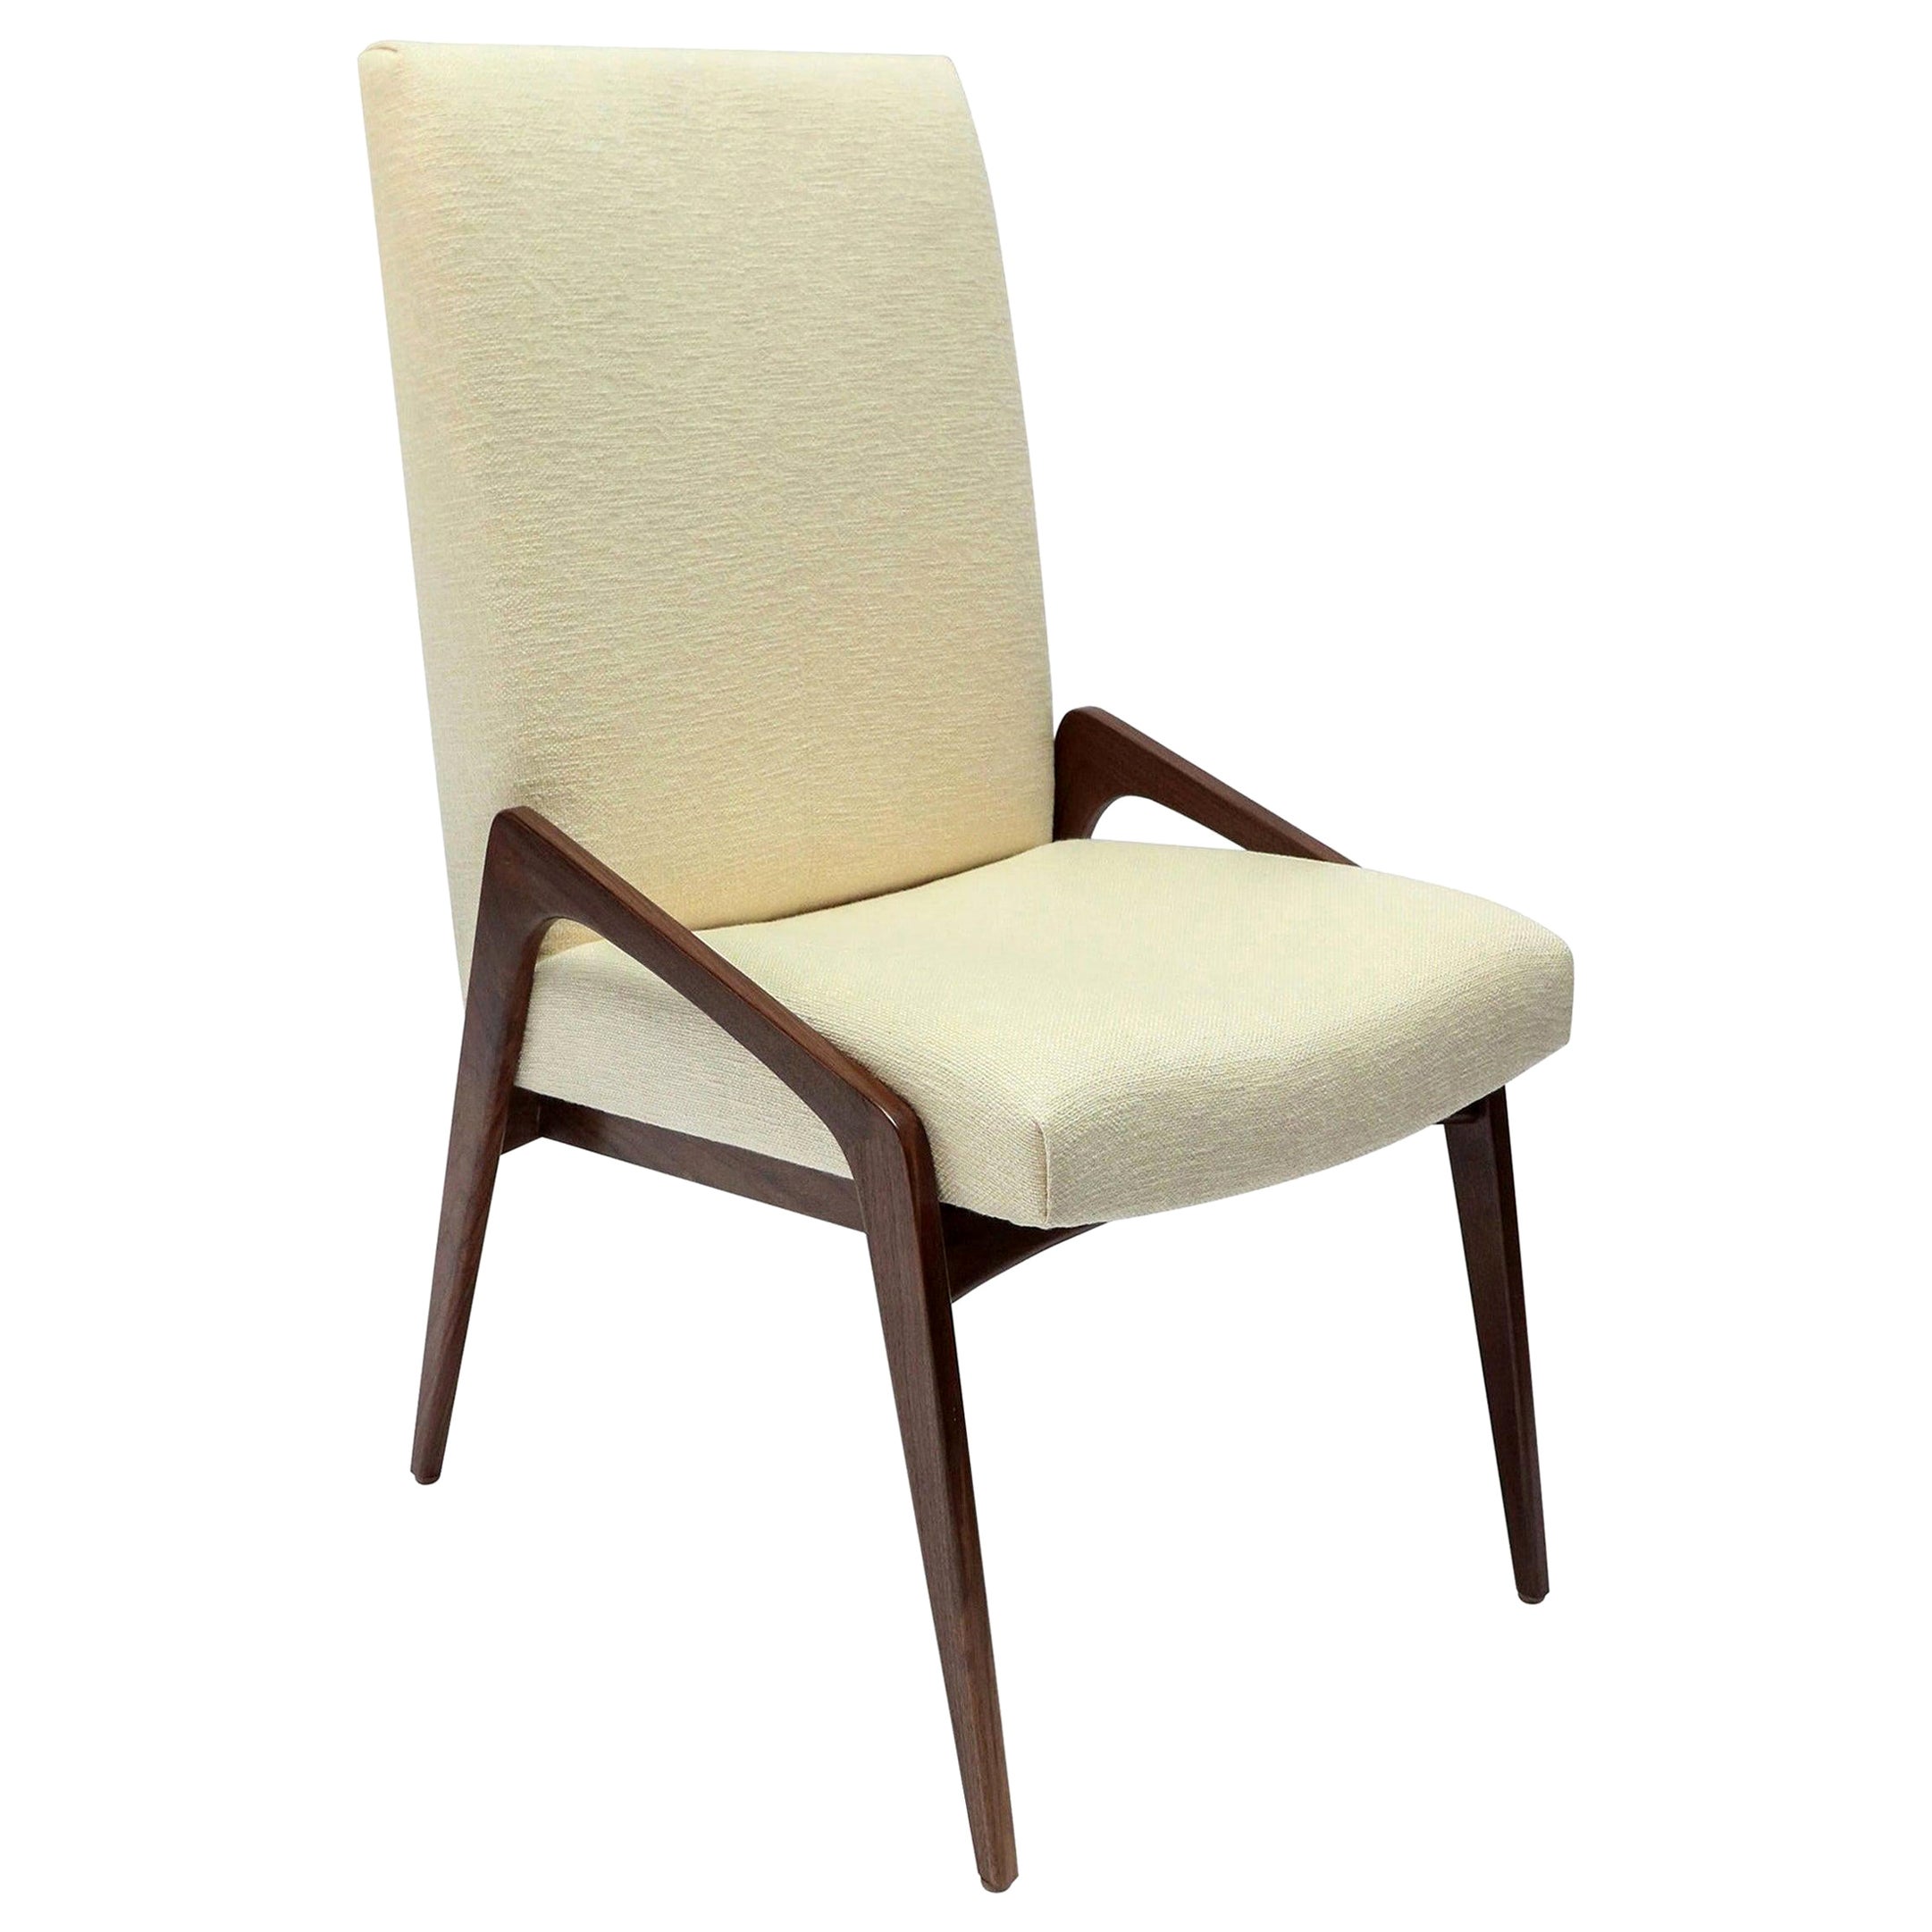 Custom Midcentury Style Walnut Dining Chairs in Ivory Linen by Adesso Imports For Sale